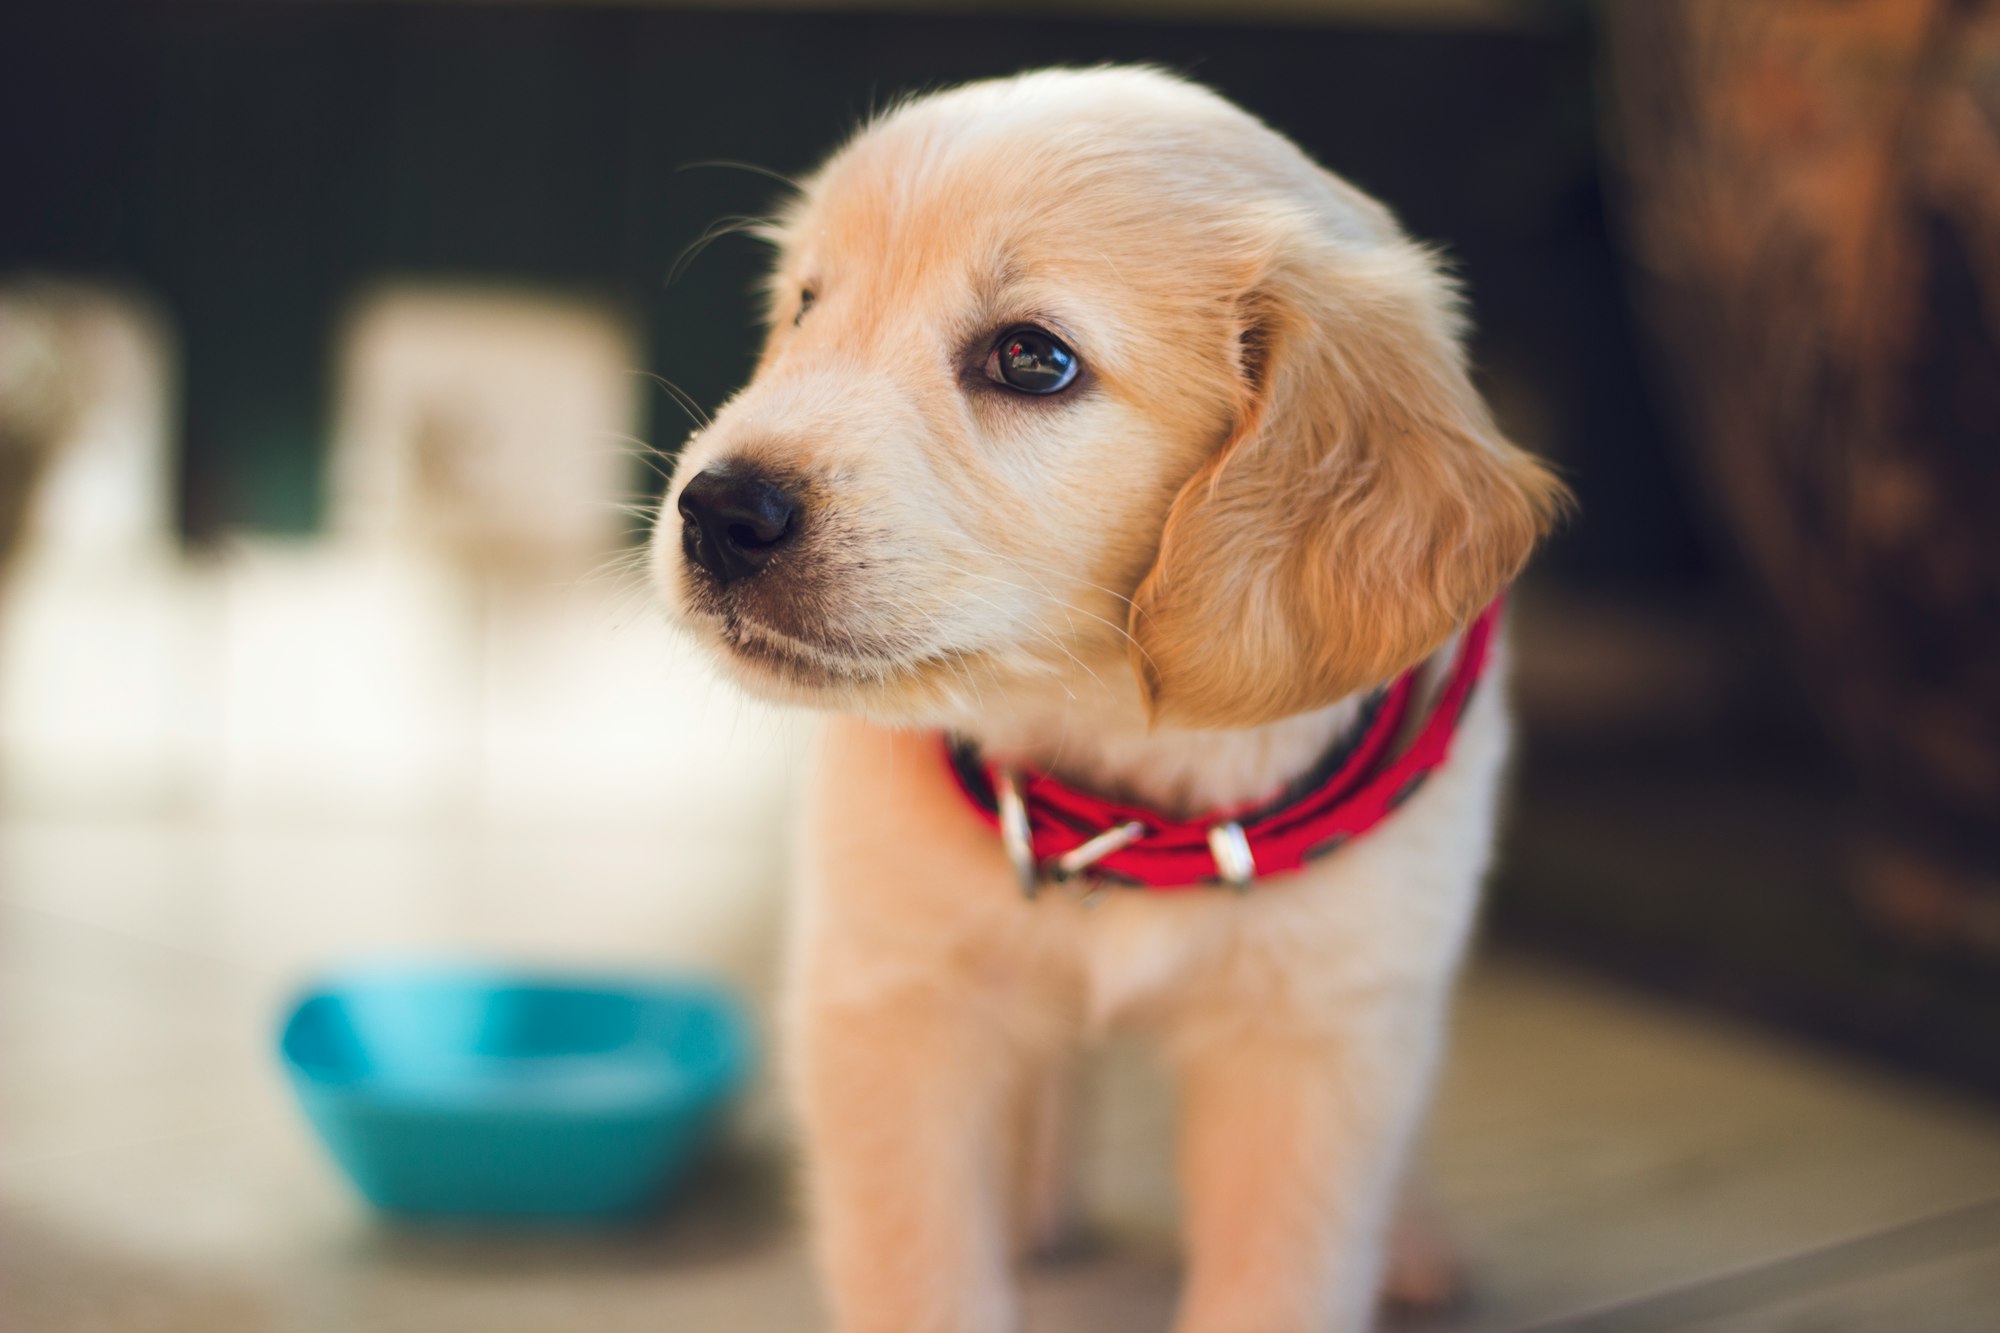 Sweet blonde cocker spaniel puppy with a red collar standing beside a blue dish